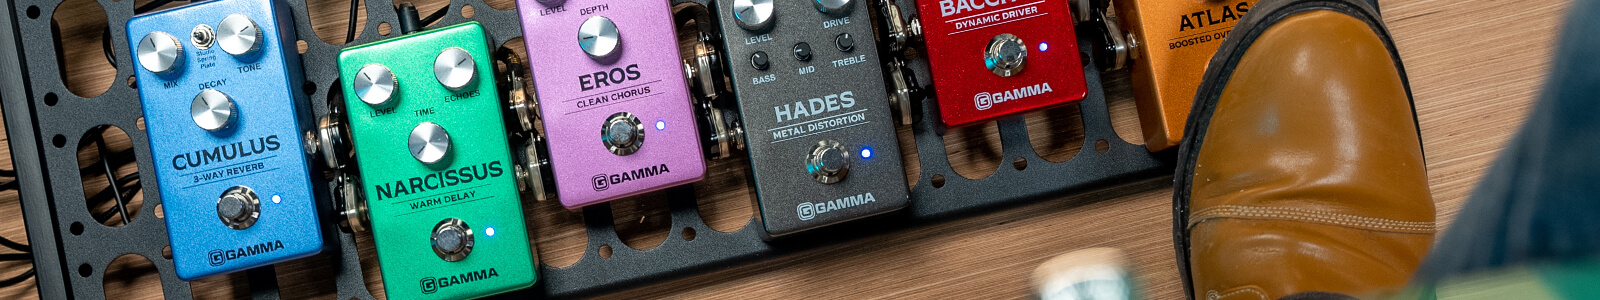 Six Gamma guitar pedals on pedal board next to guitar player: Cumulus, Narcissus, Eros, Hades, Bacchus, and Atlas